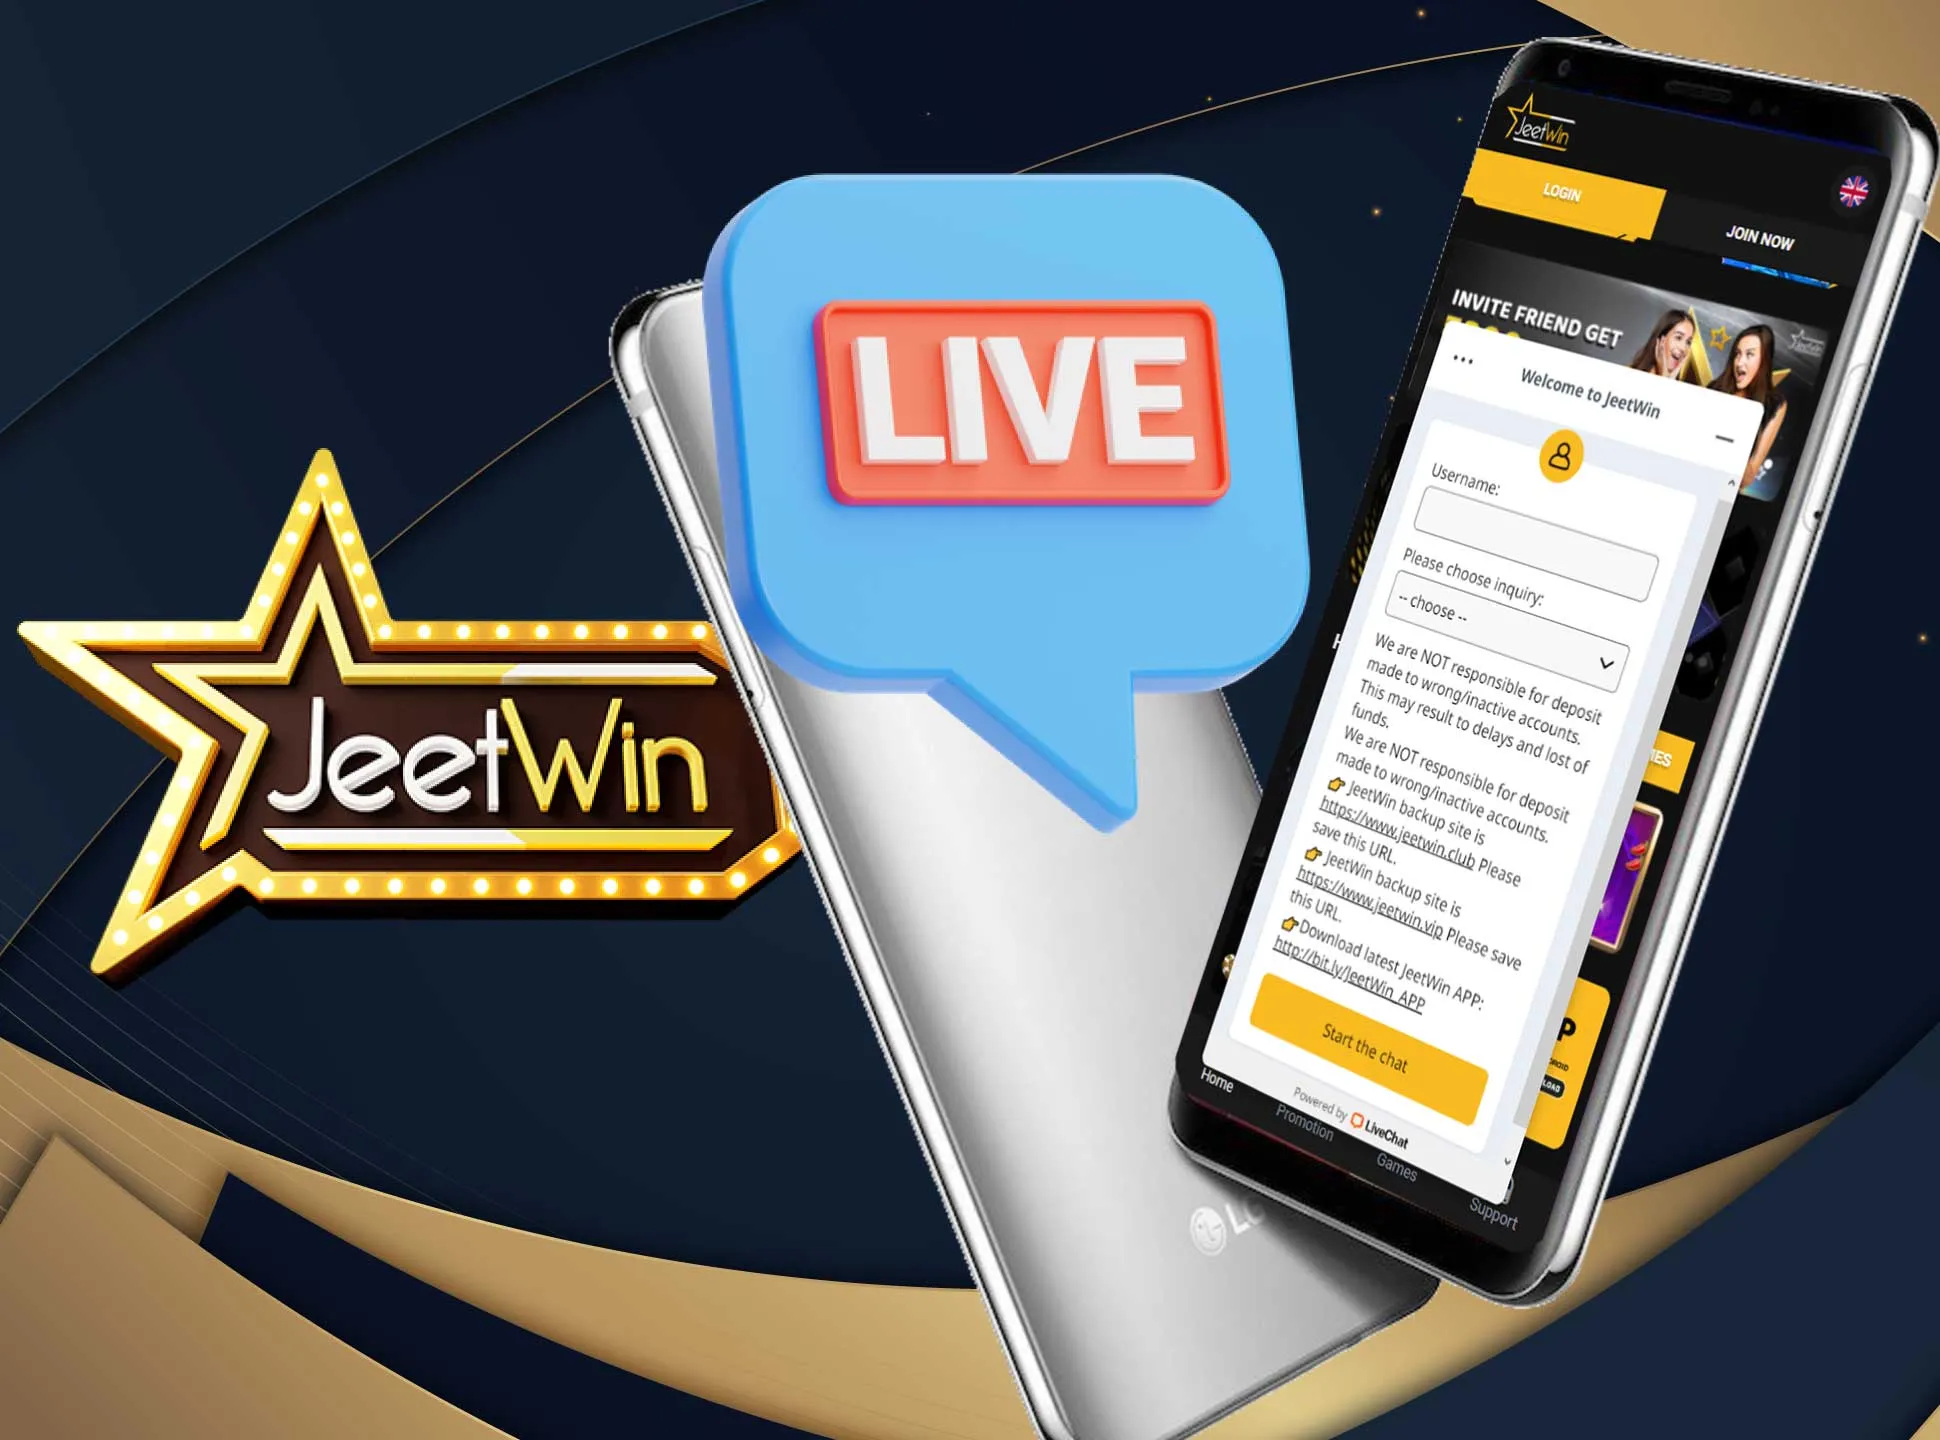 Jeetwin app has a 24/7 online chat.